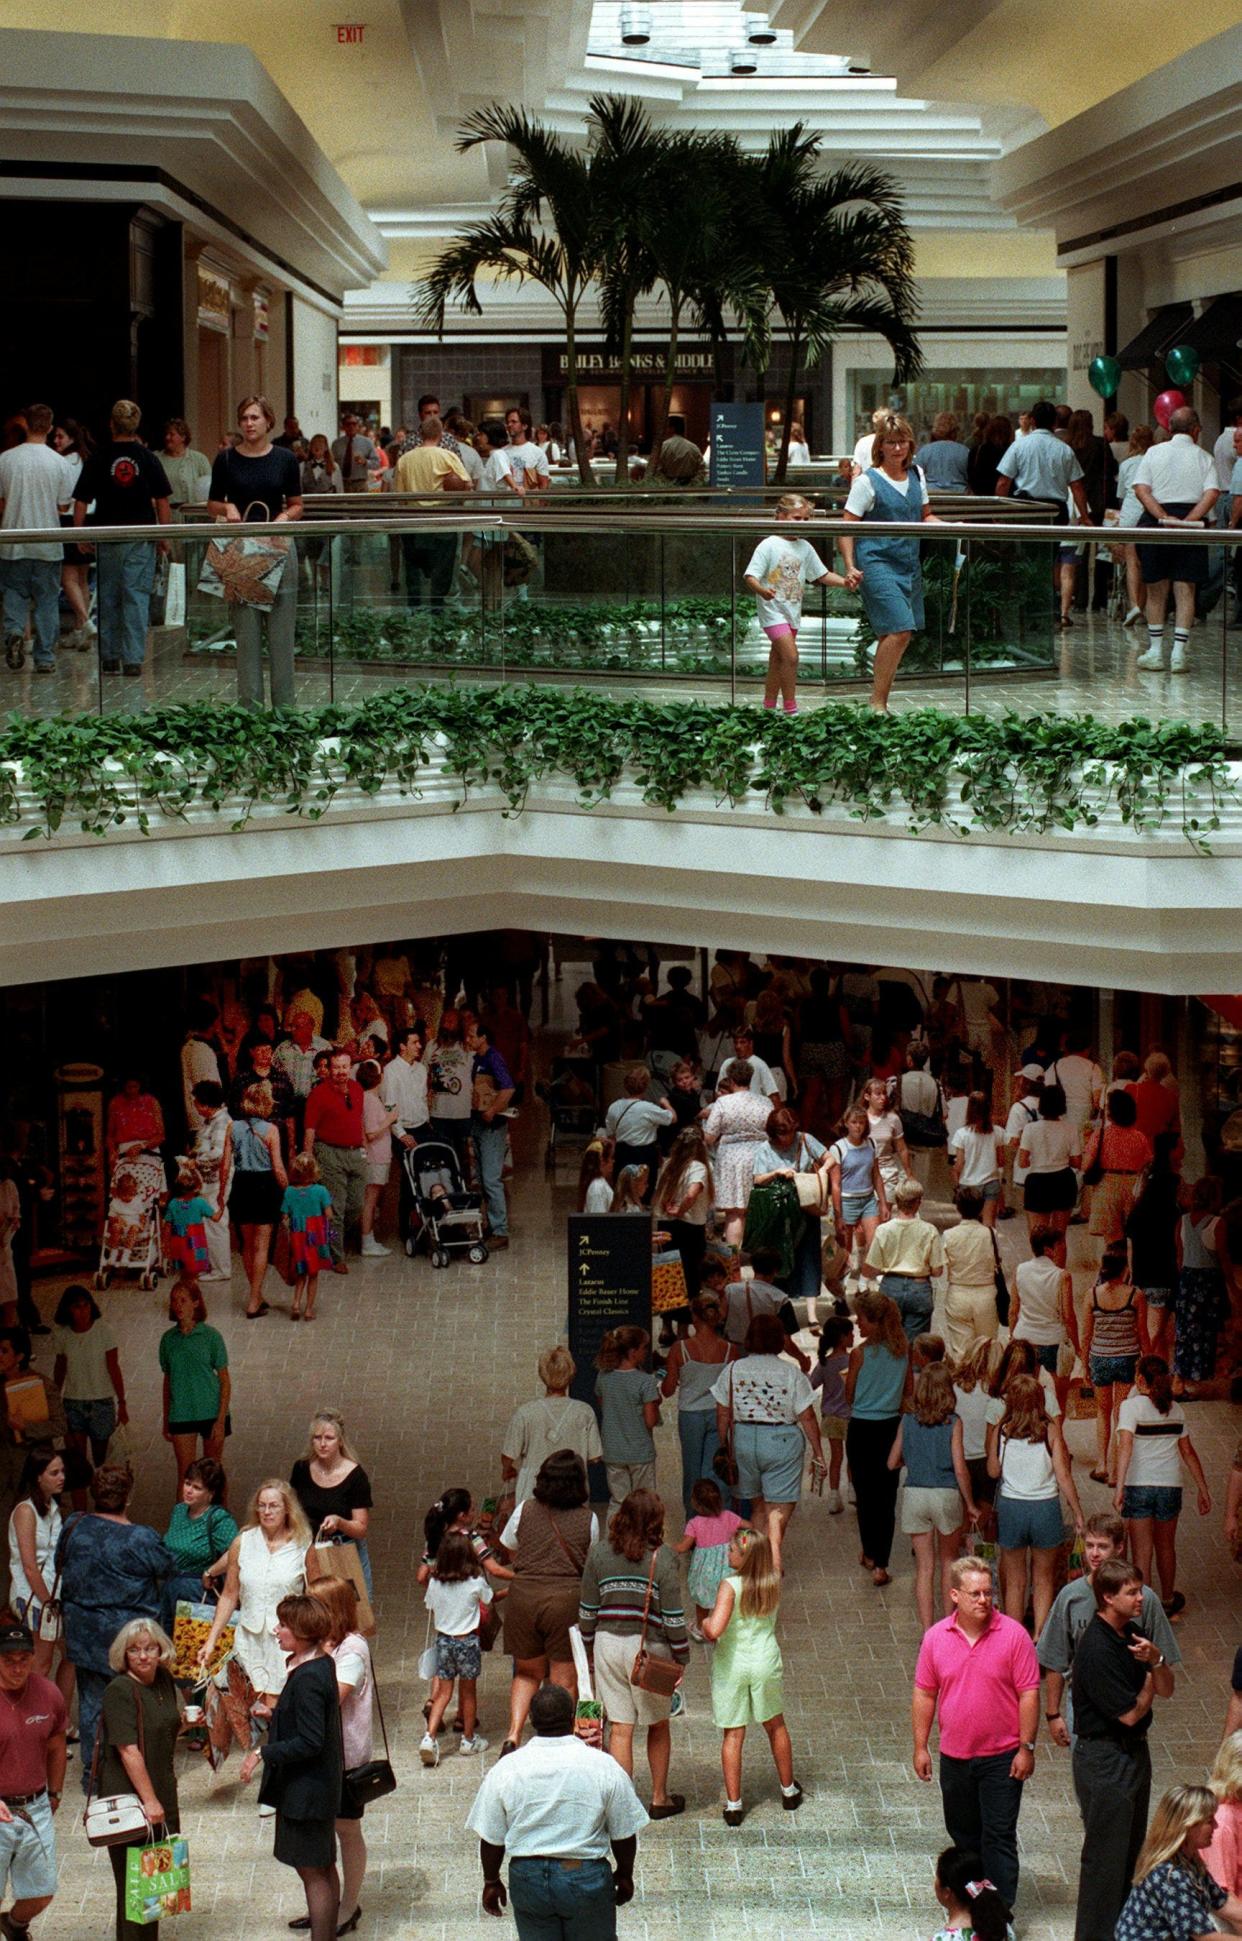 The Mall at Tuttle Crossing attracted a packed house when it opened ion July 11, 1997.